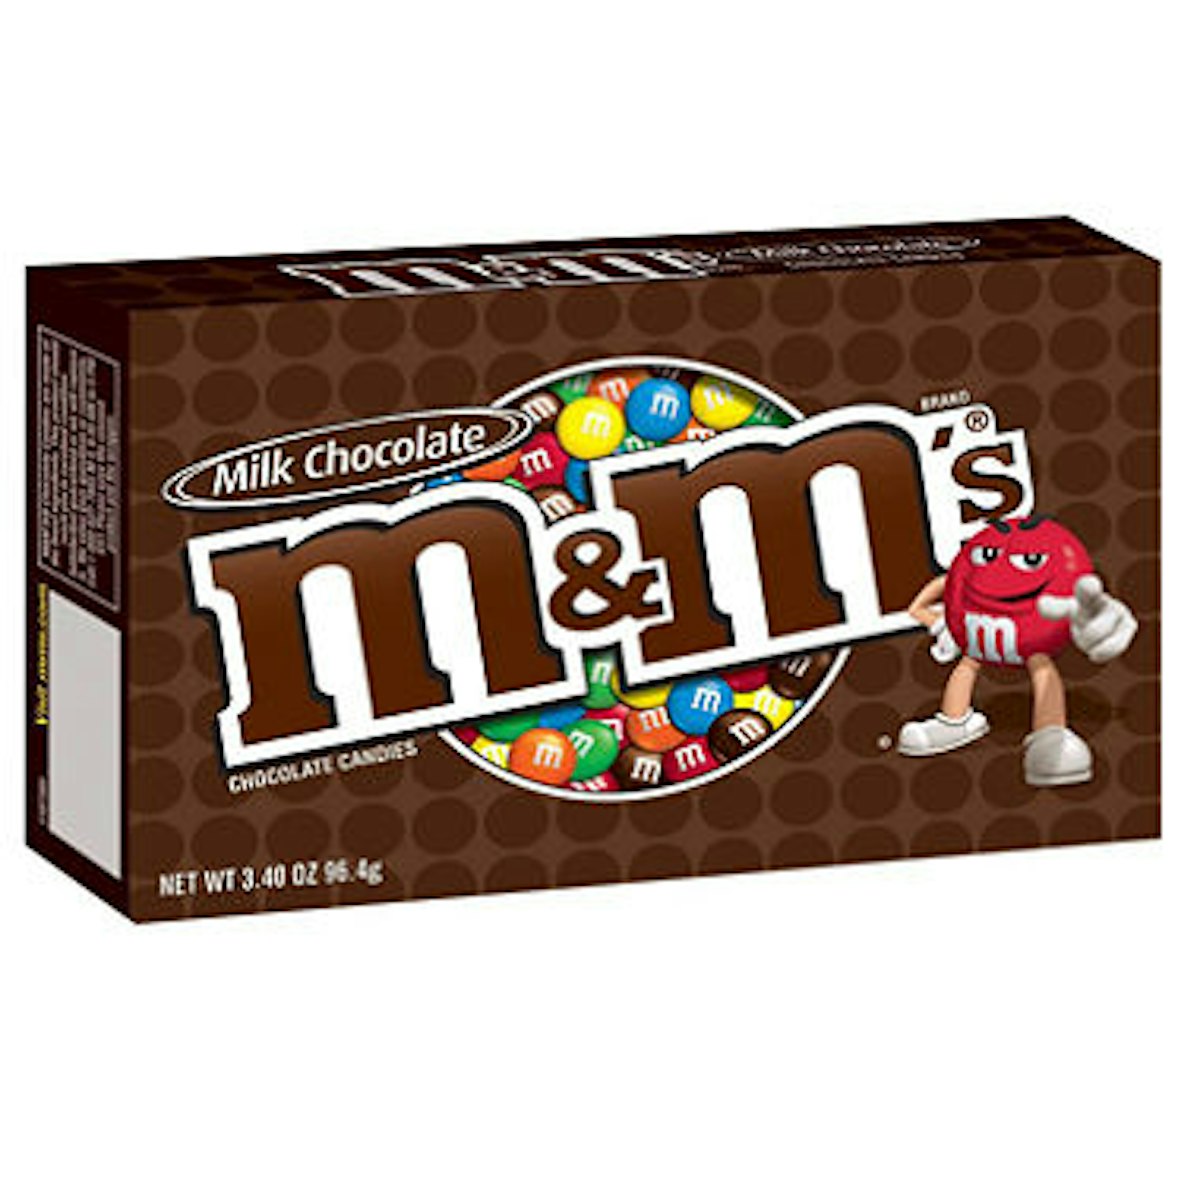 M&M's chocolate-coated pandering provokes ludicrous reaction – The